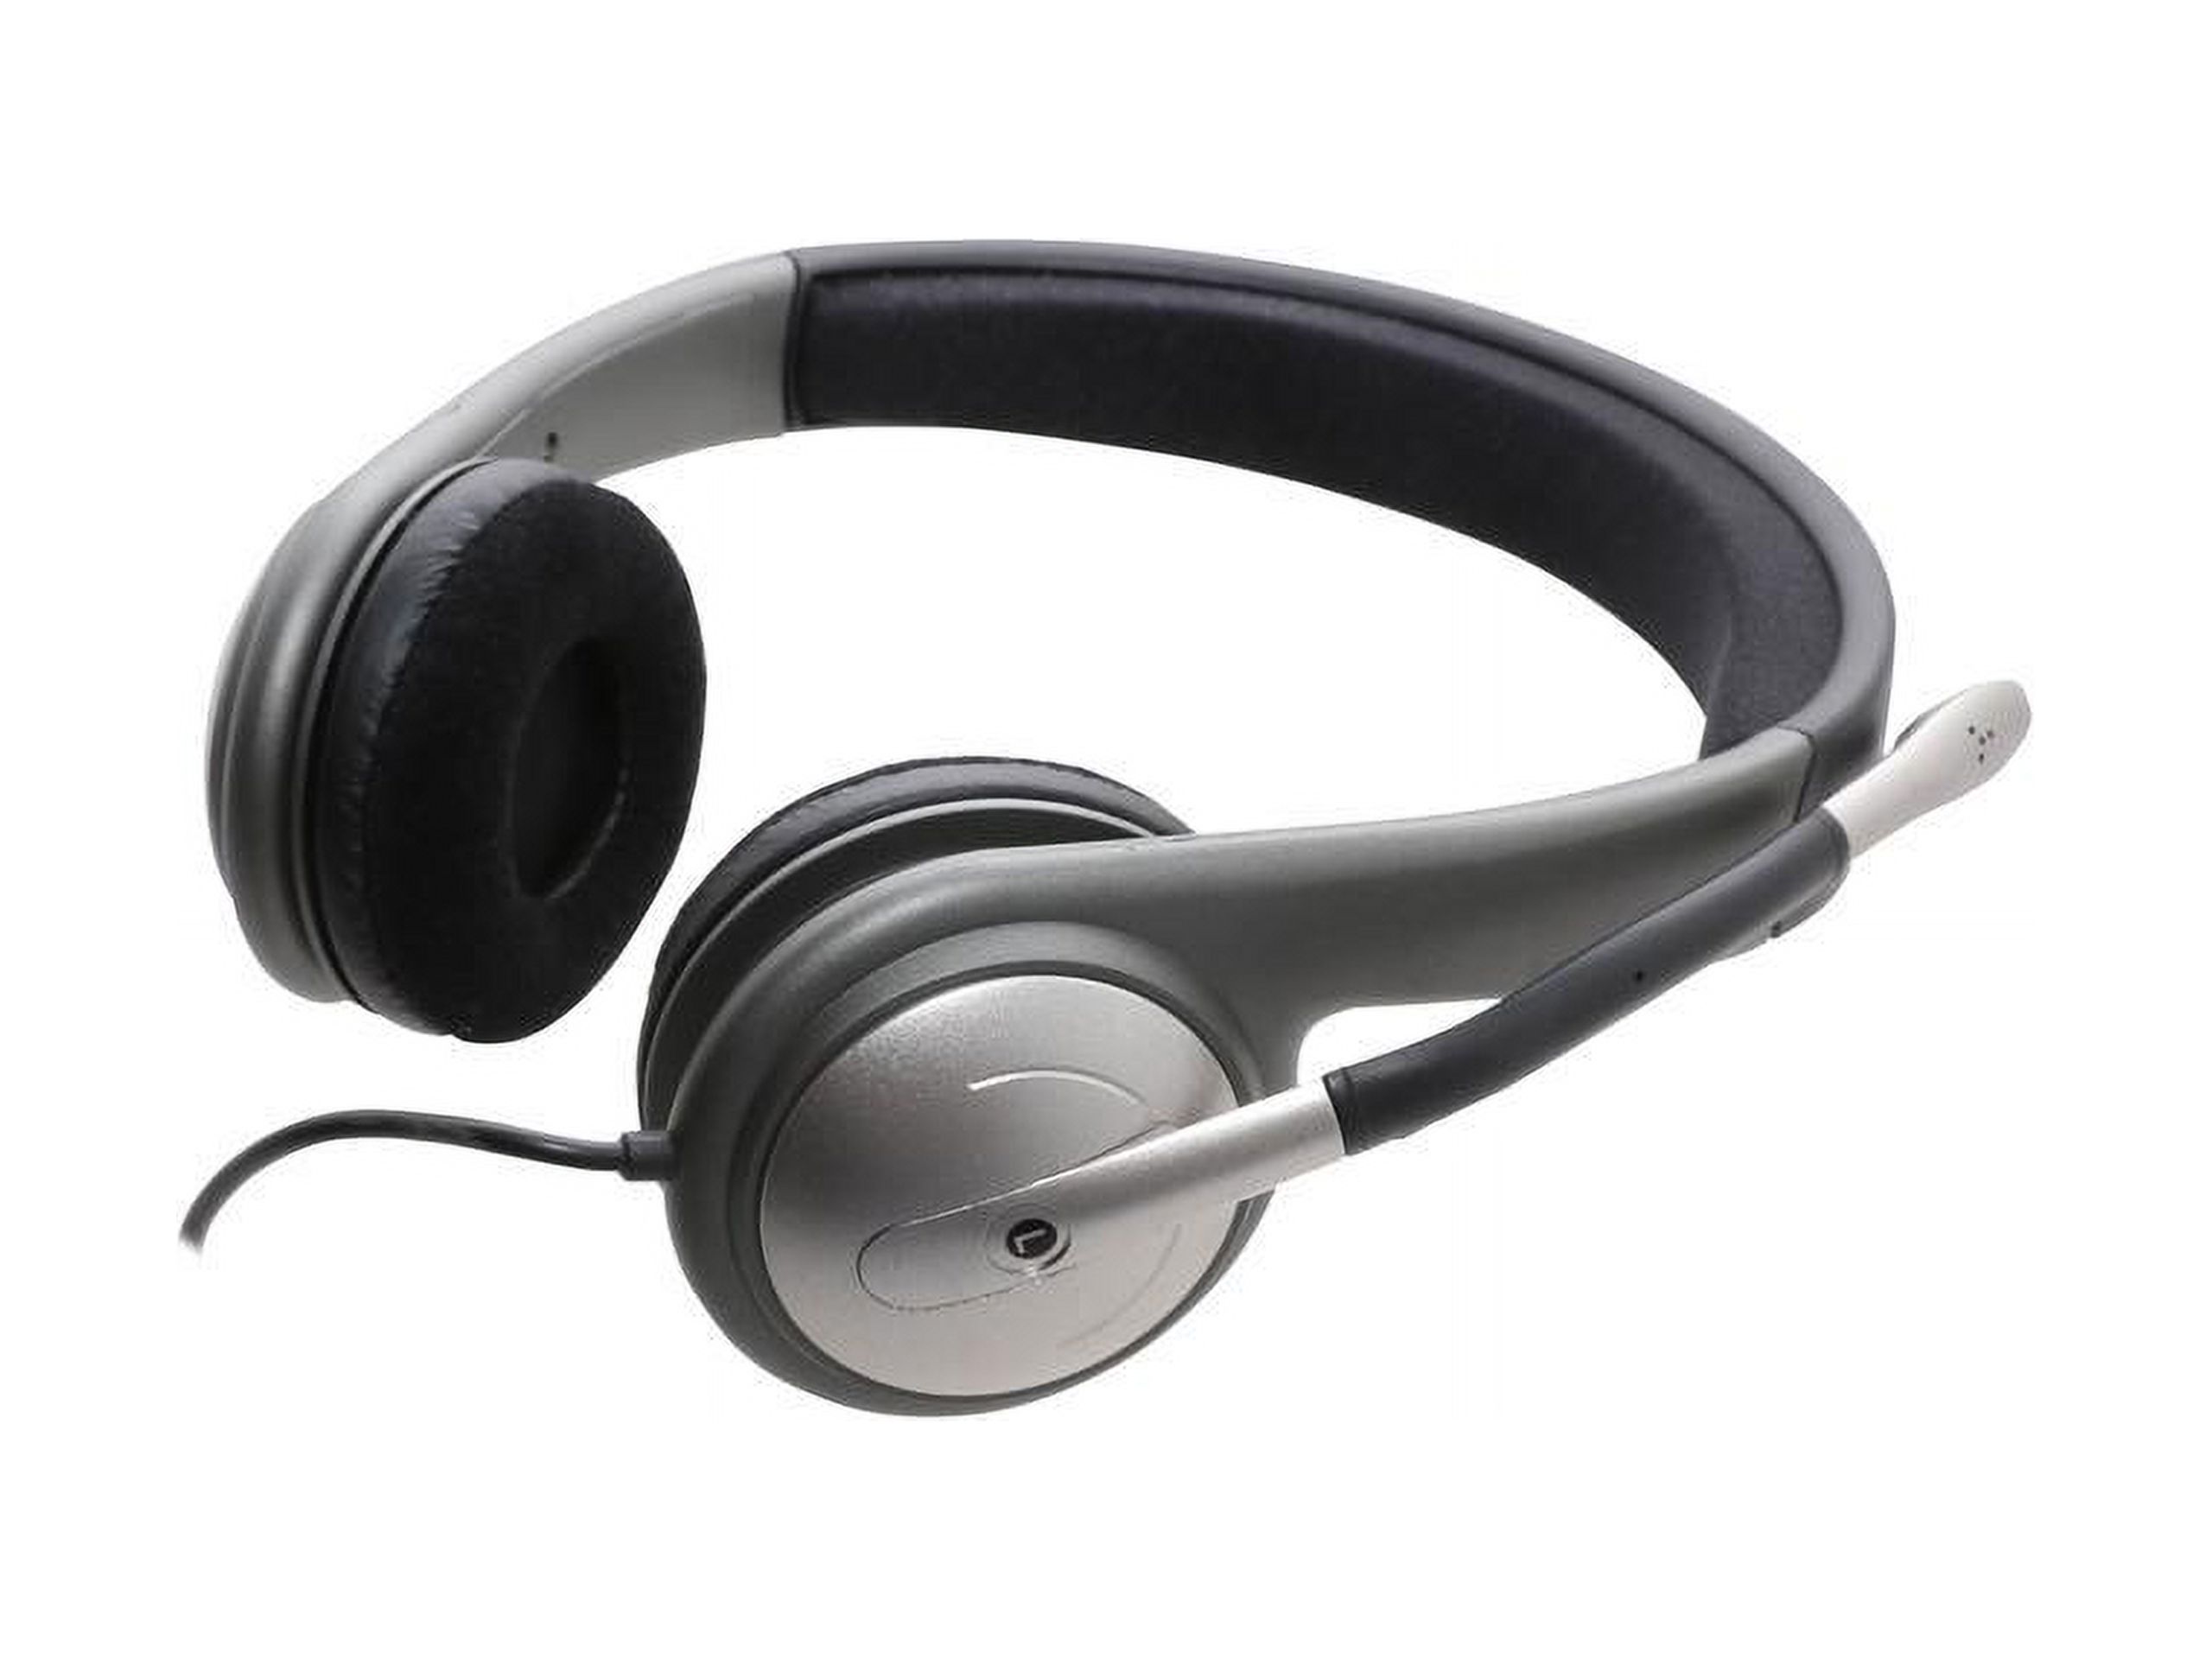 SYBA Multimedia Connectland Headset - Stereo - USB, Mini-phone (3.5mm) - Wired - 32 Ohm - 20 Hz - 20 kHz - Over-the-head - Binaural - Ear-cup - image 1 of 5